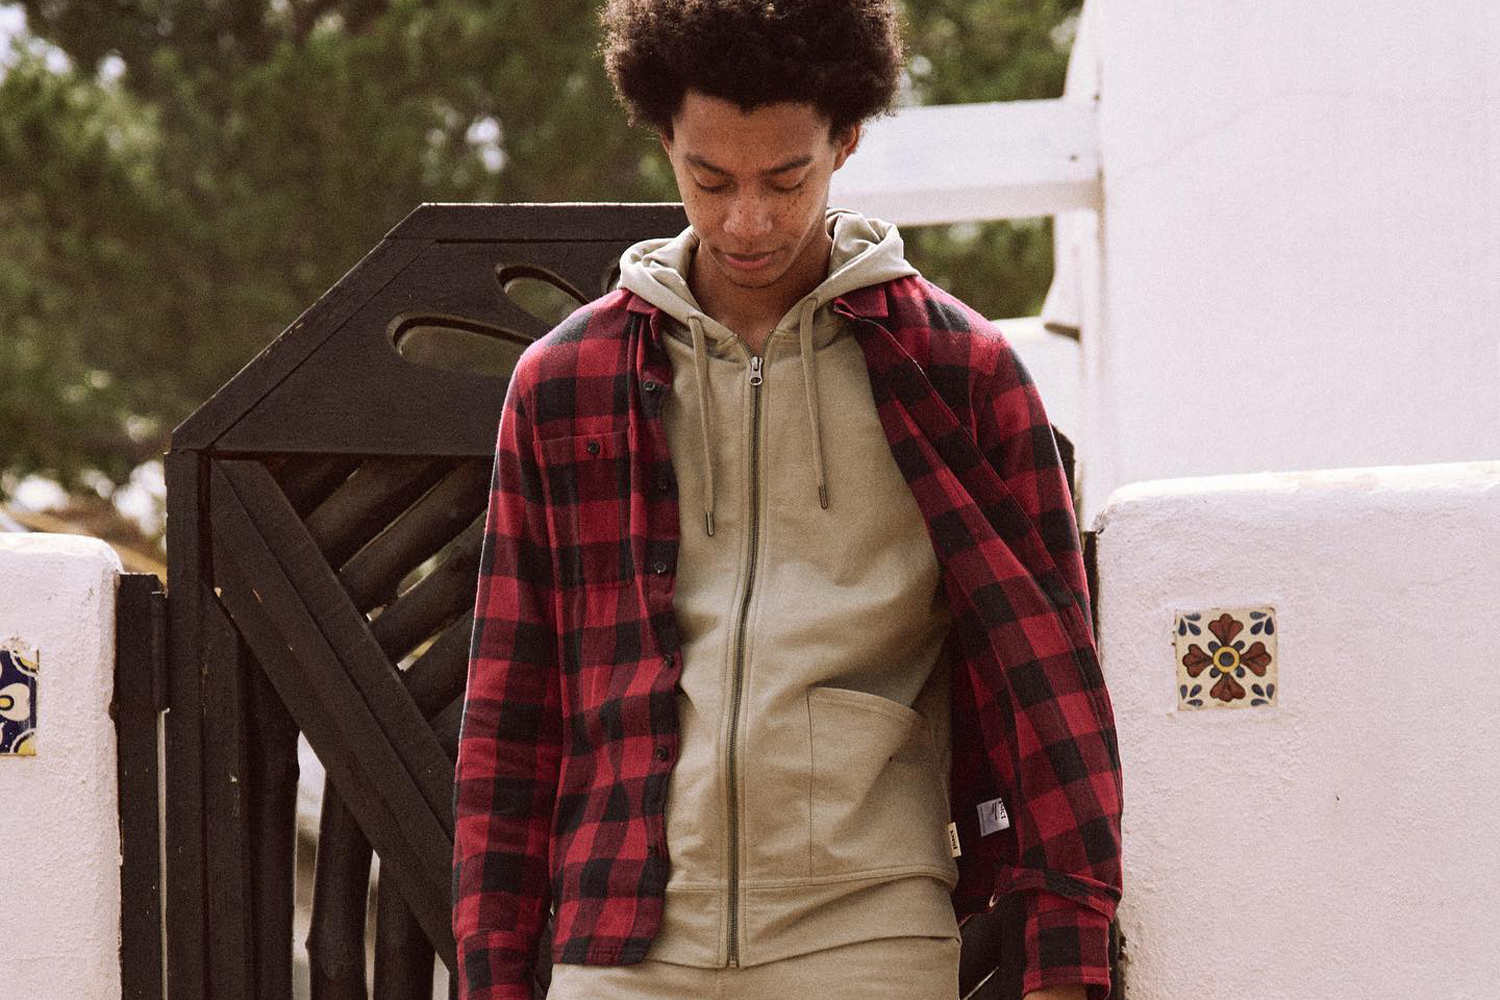 Pact apparel on a man wearing a red and black flannel top with a tan shirt underneath